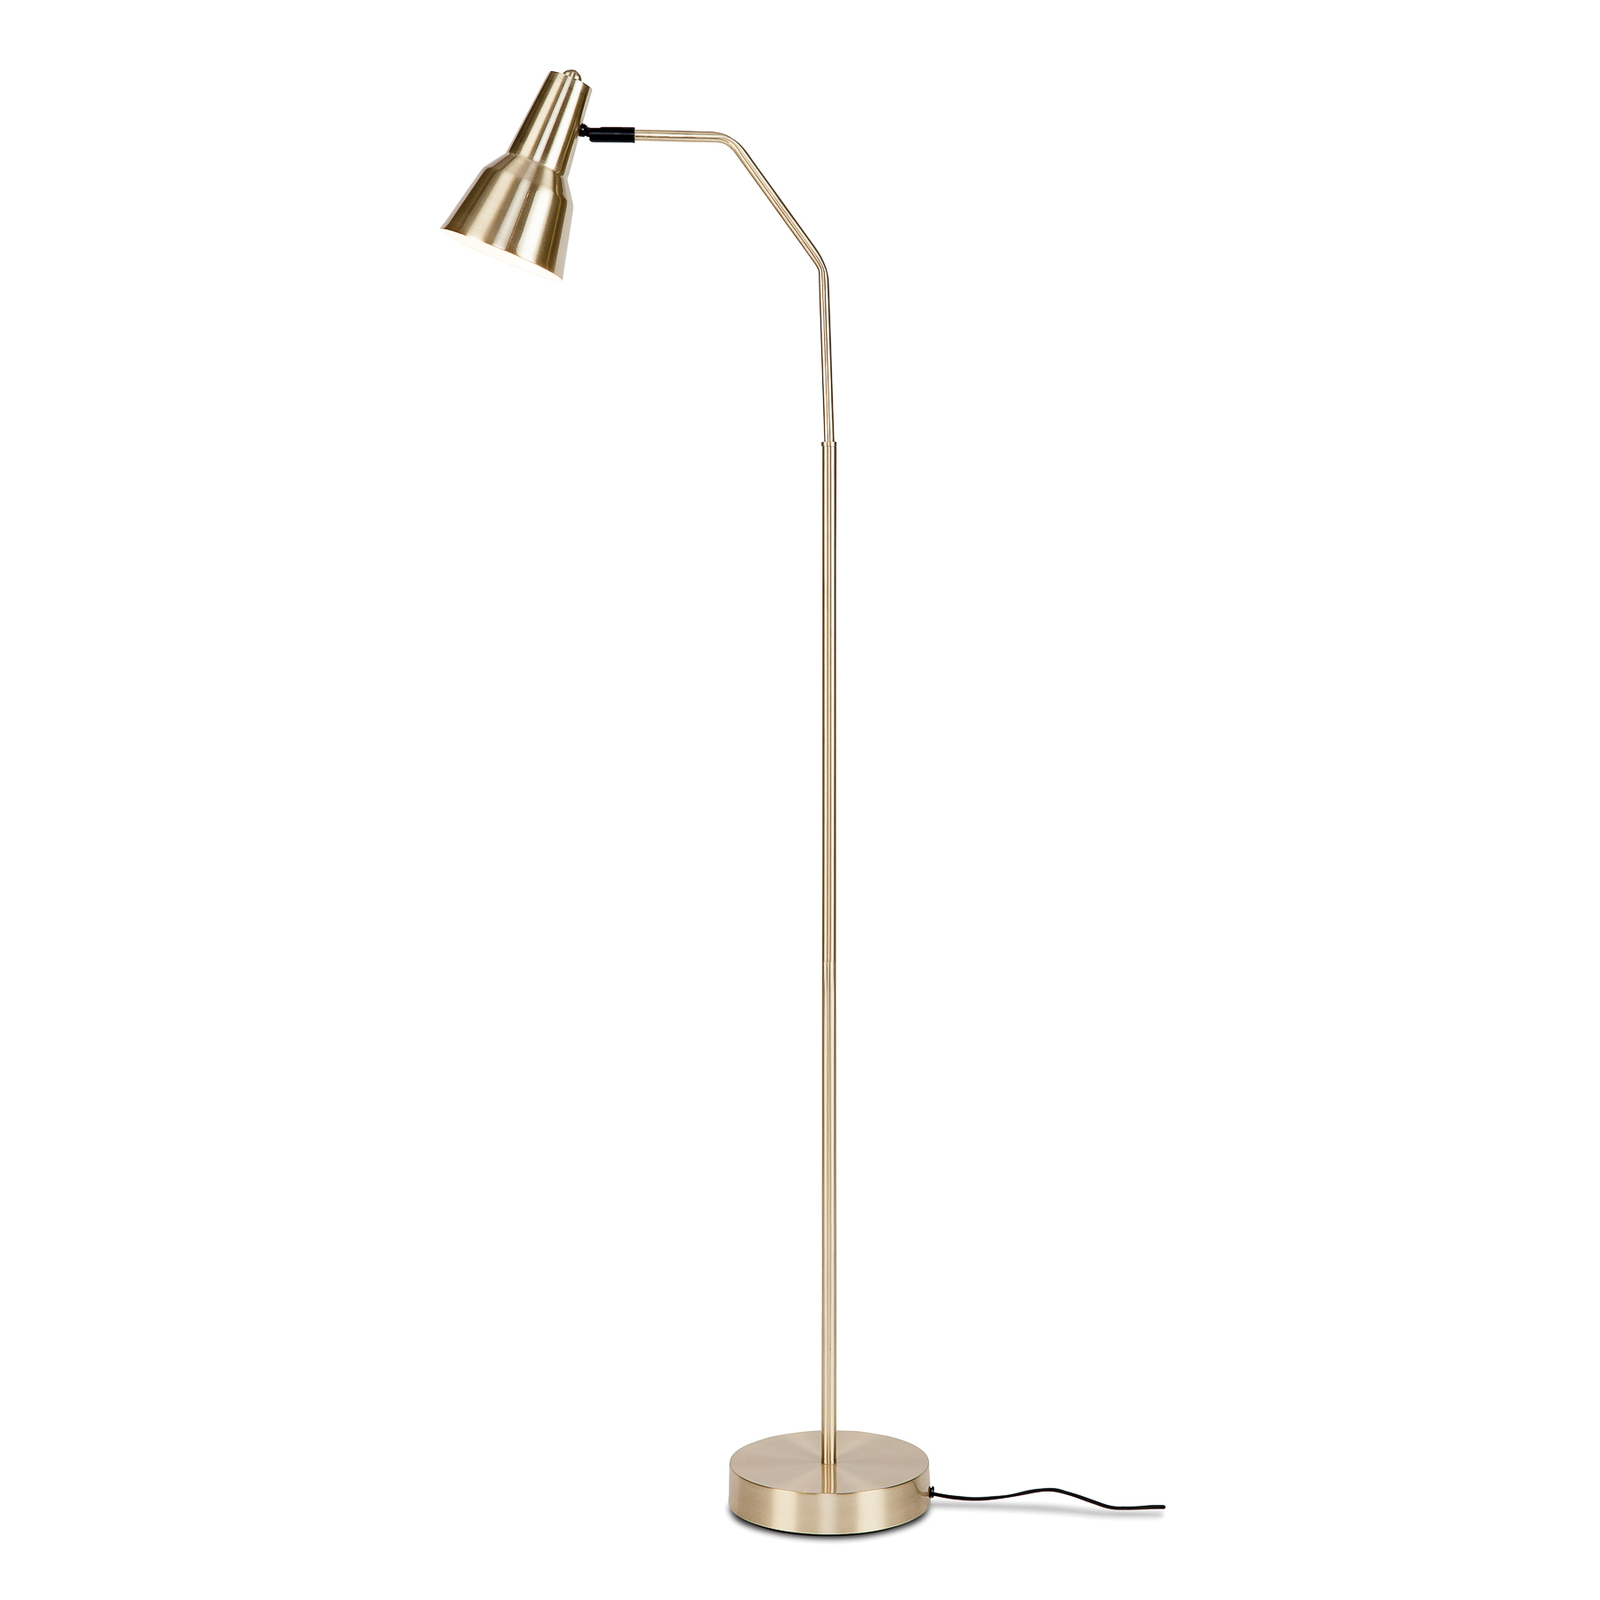 It's about RoMi Valencia floor lamp, gold-coloured